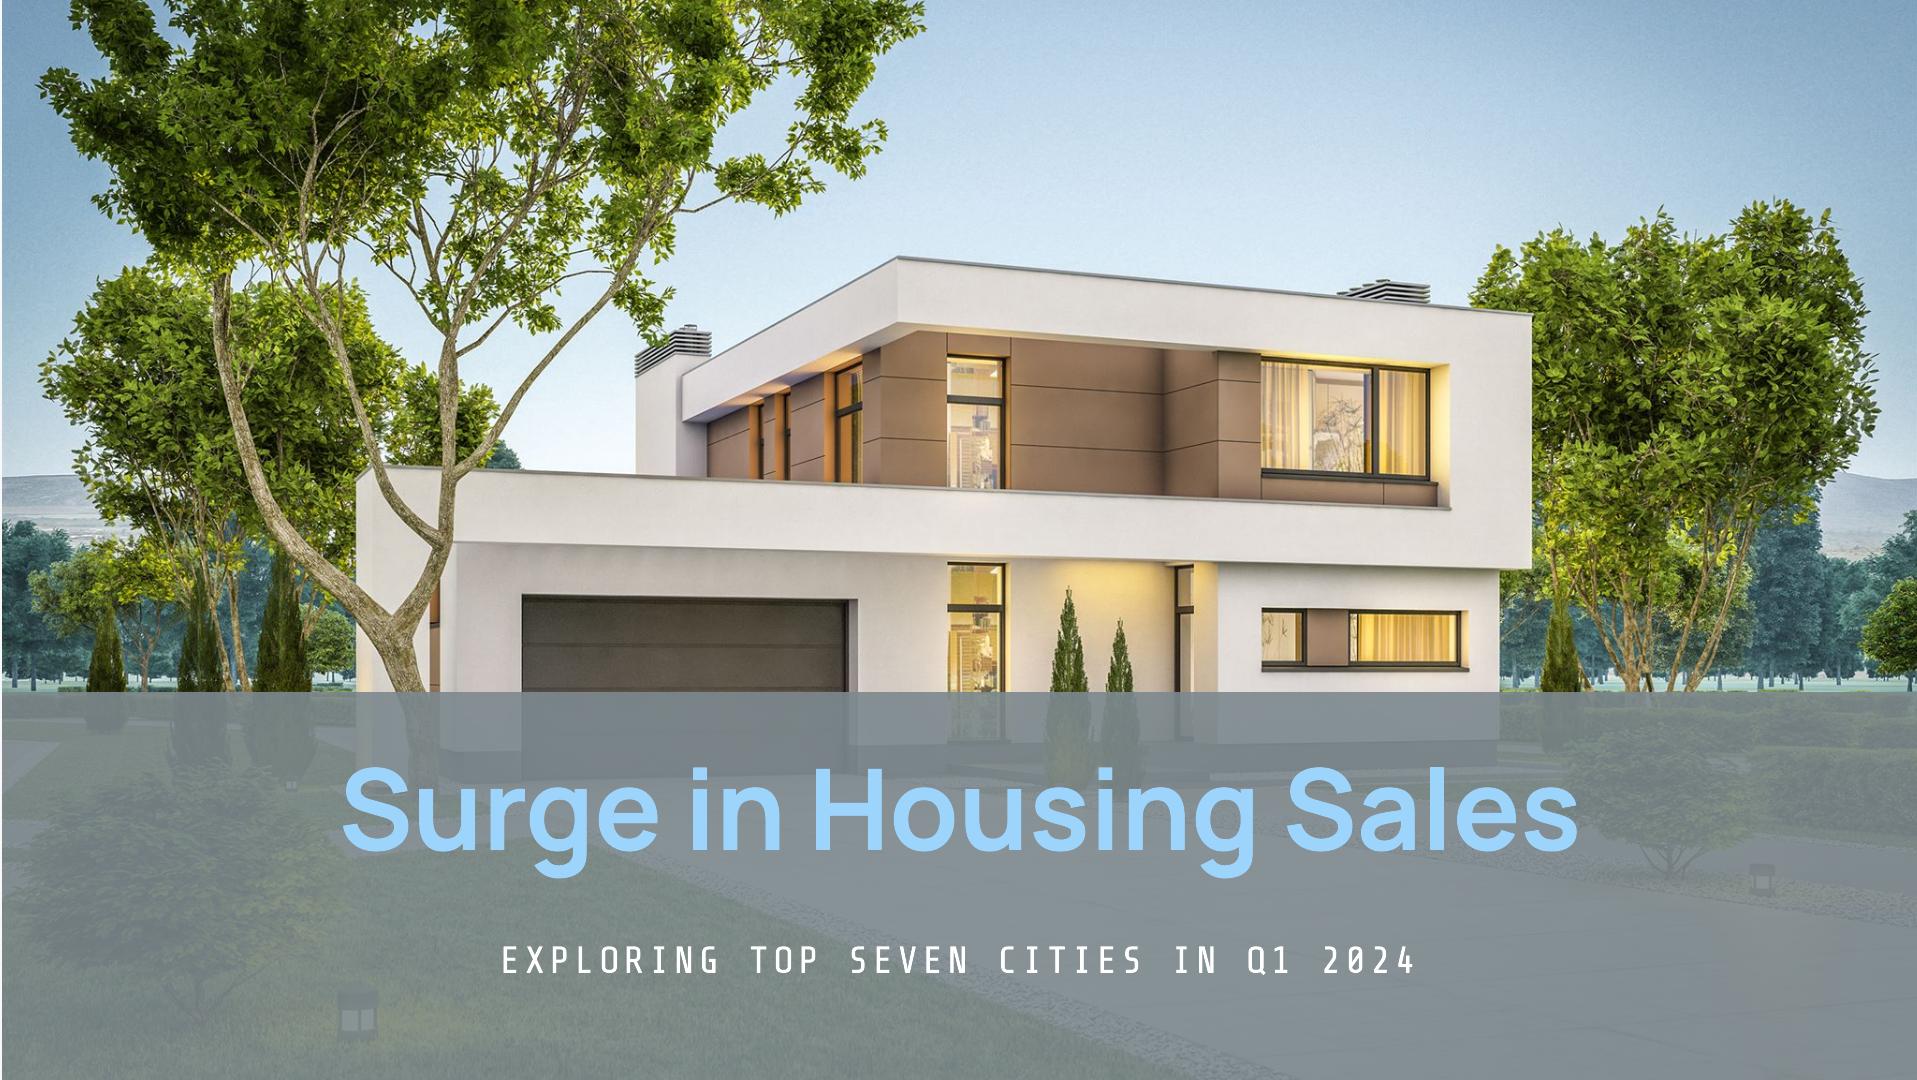 Exploring the Surge in Housing Sales Across Top Seven Cities in Q1 2024